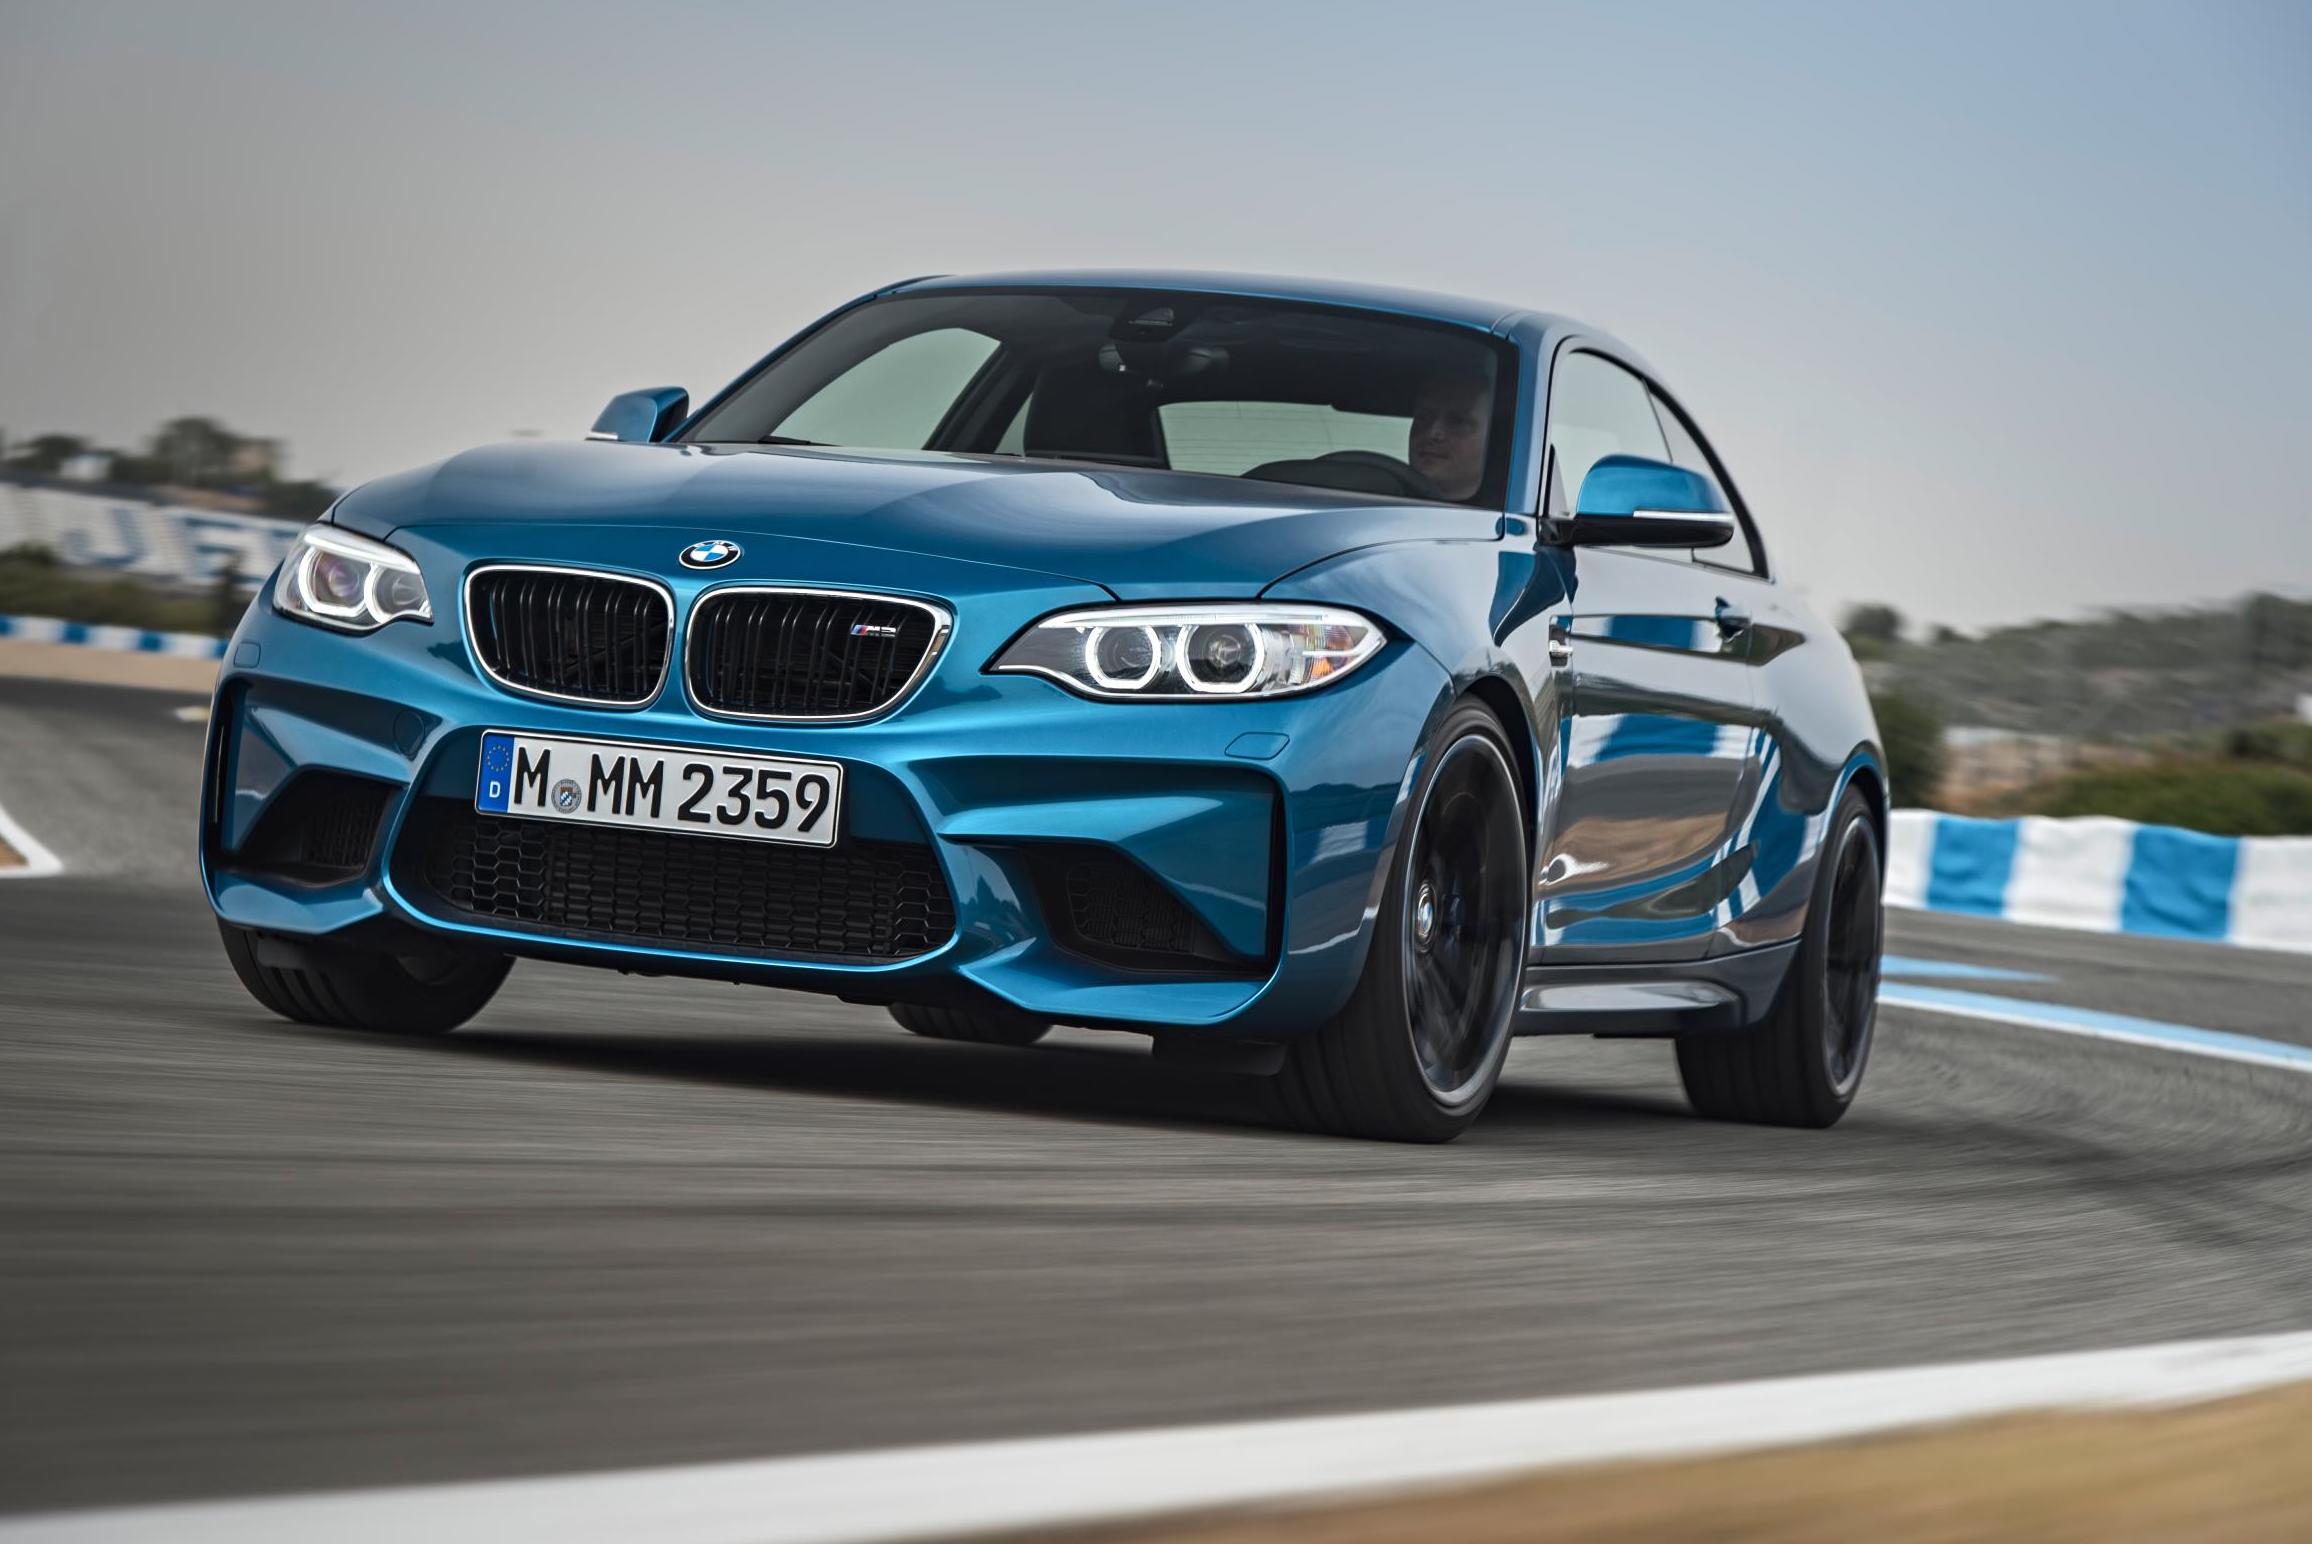 BMW M2 Gran Coupe to come with next-gen model – report